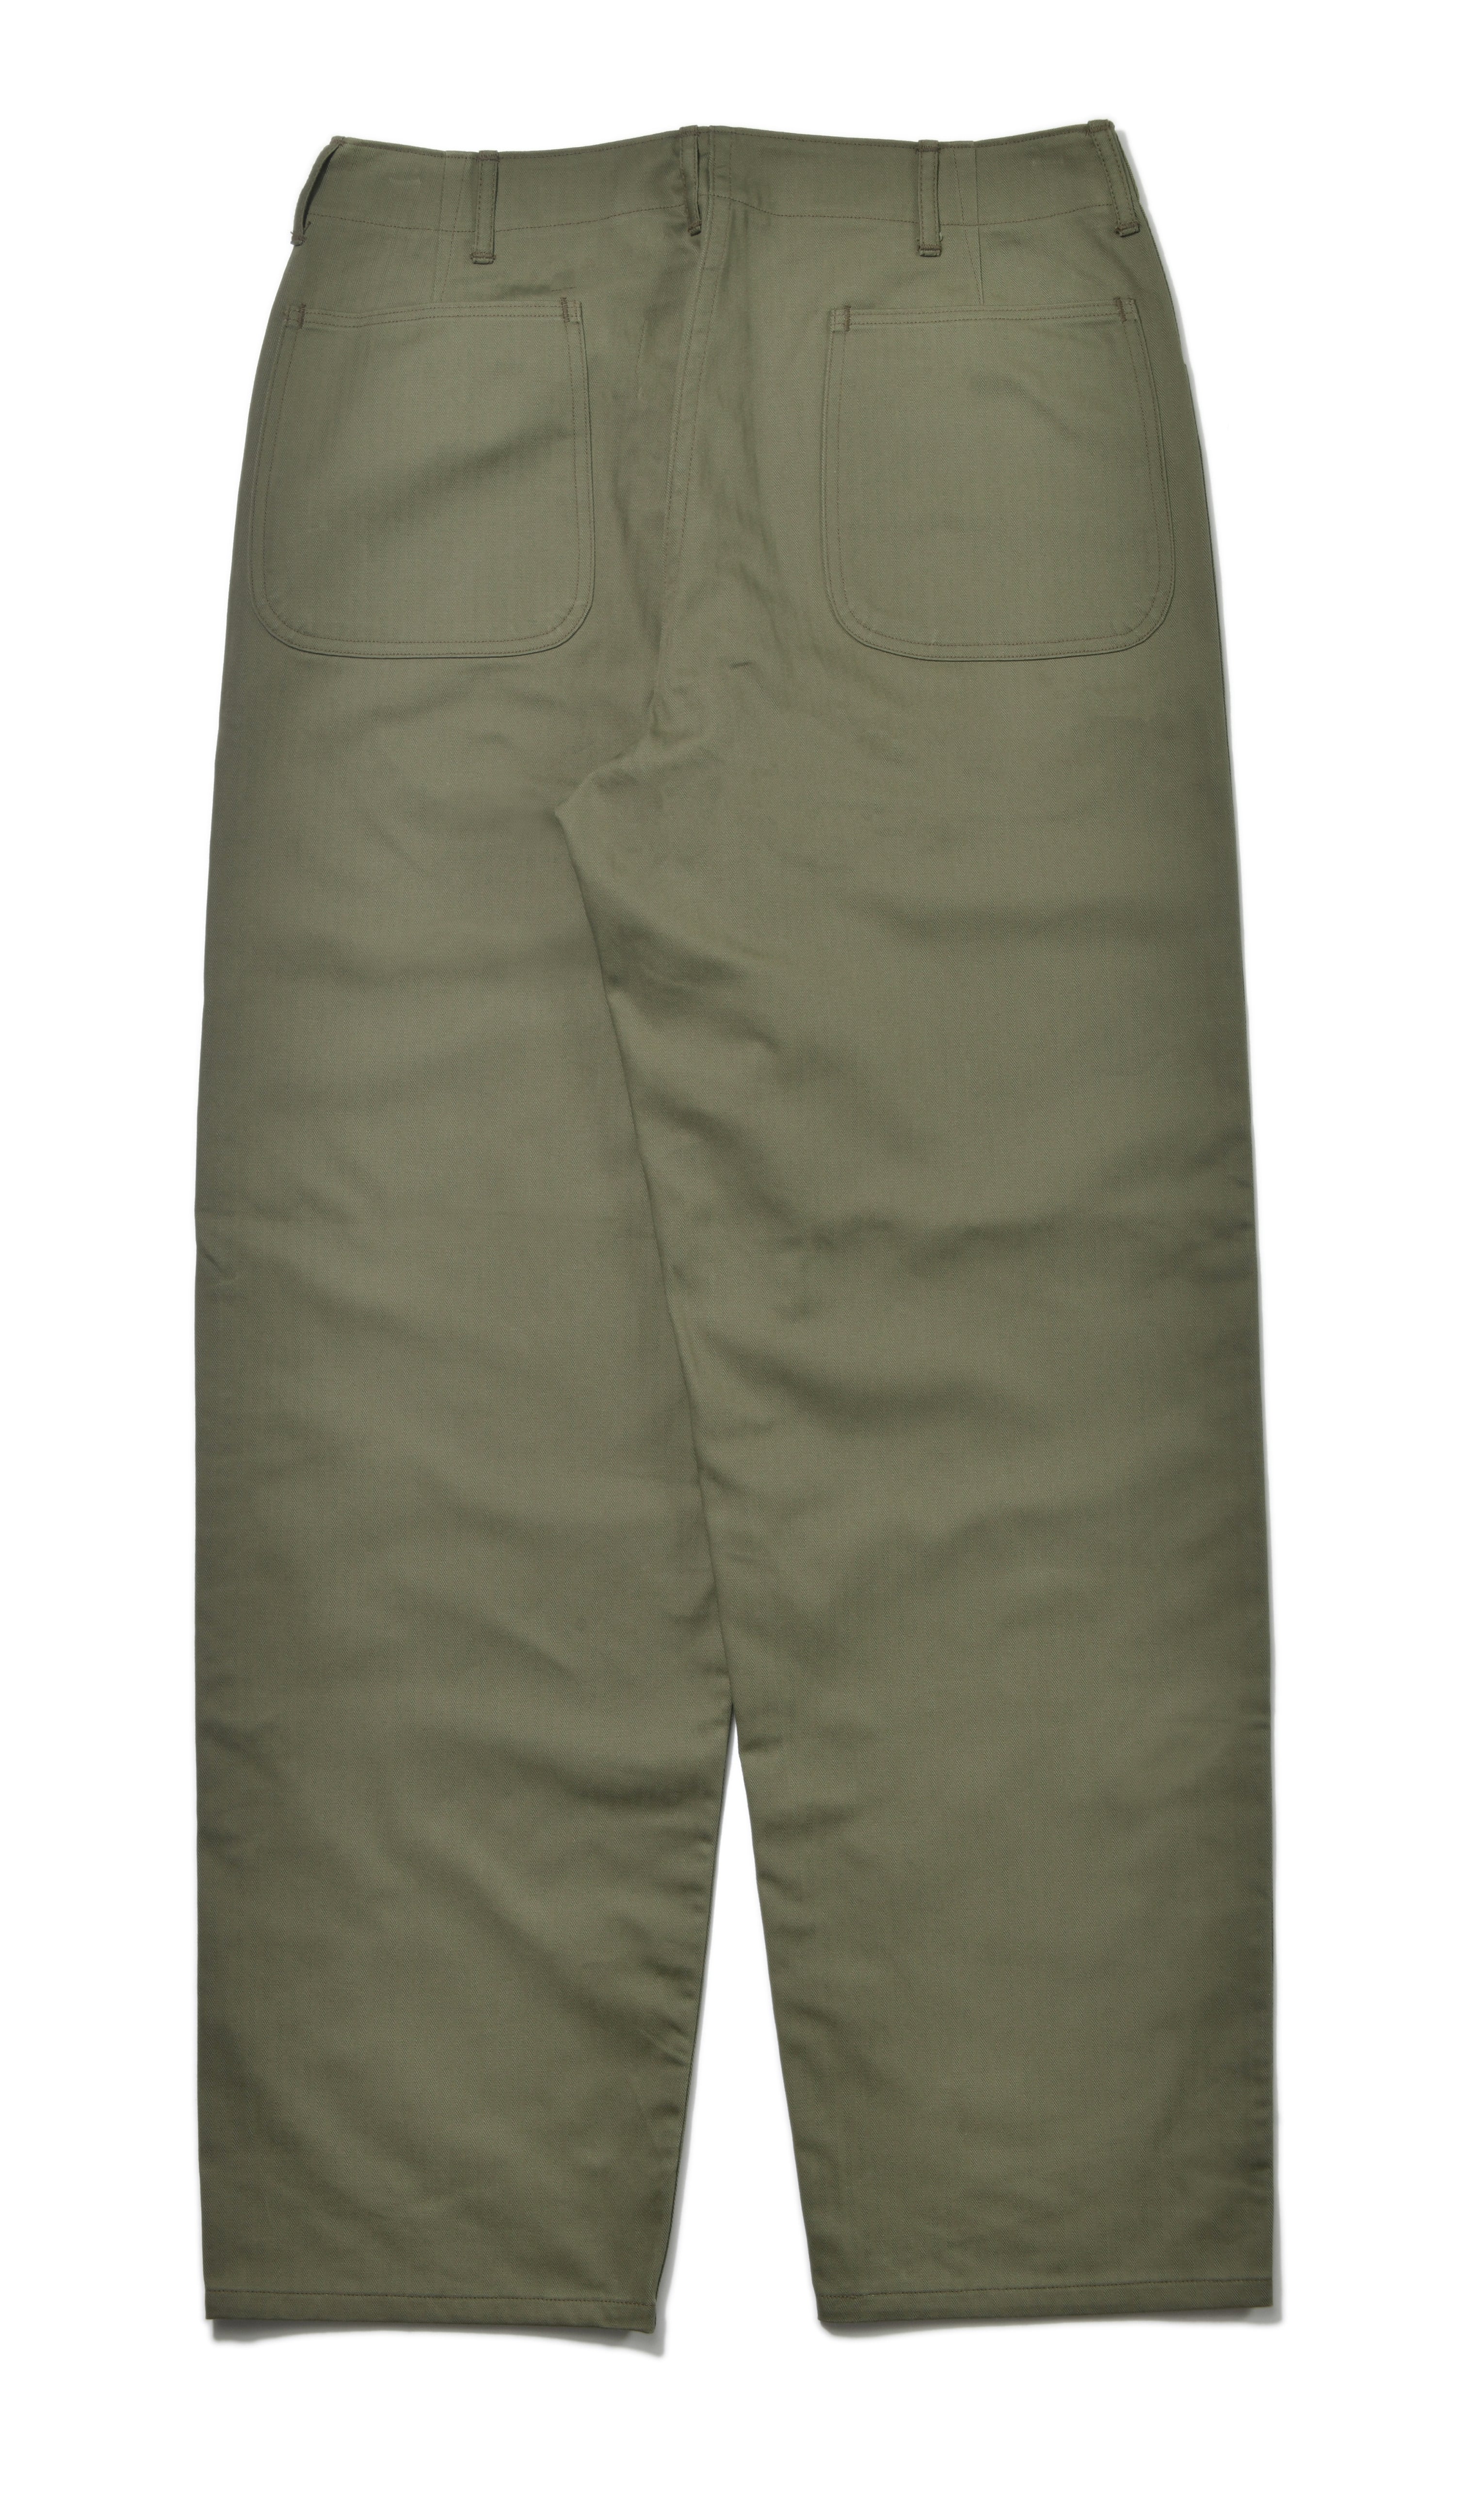 TROUSERS, UTILITY N-3 – The Real McCoy's